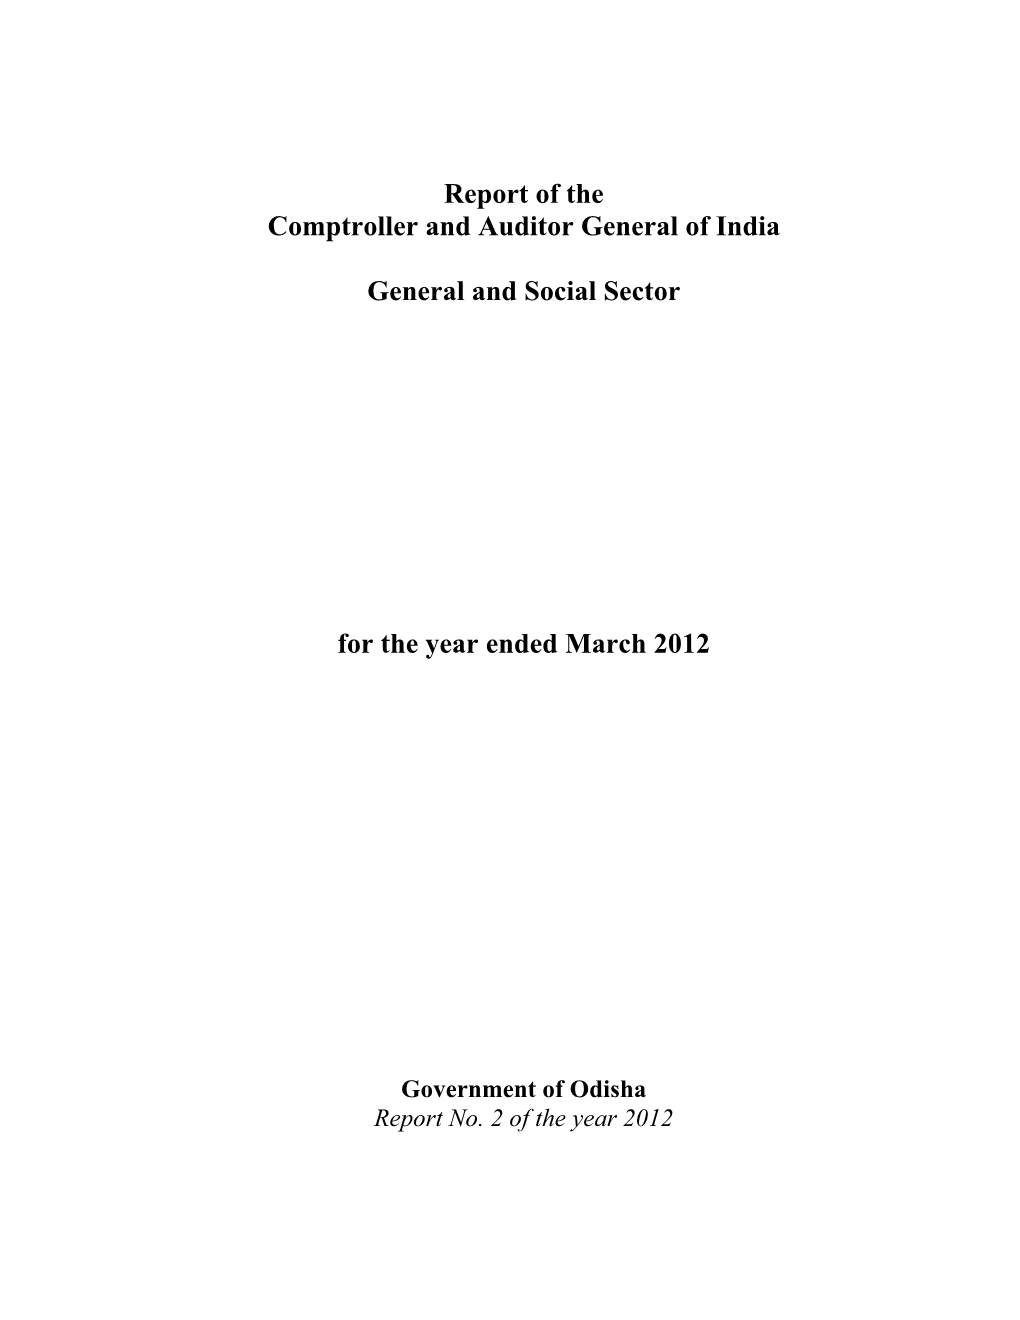 Government of Odisha Report No. 2 of the Year 2012 TABLE of CONTENTS